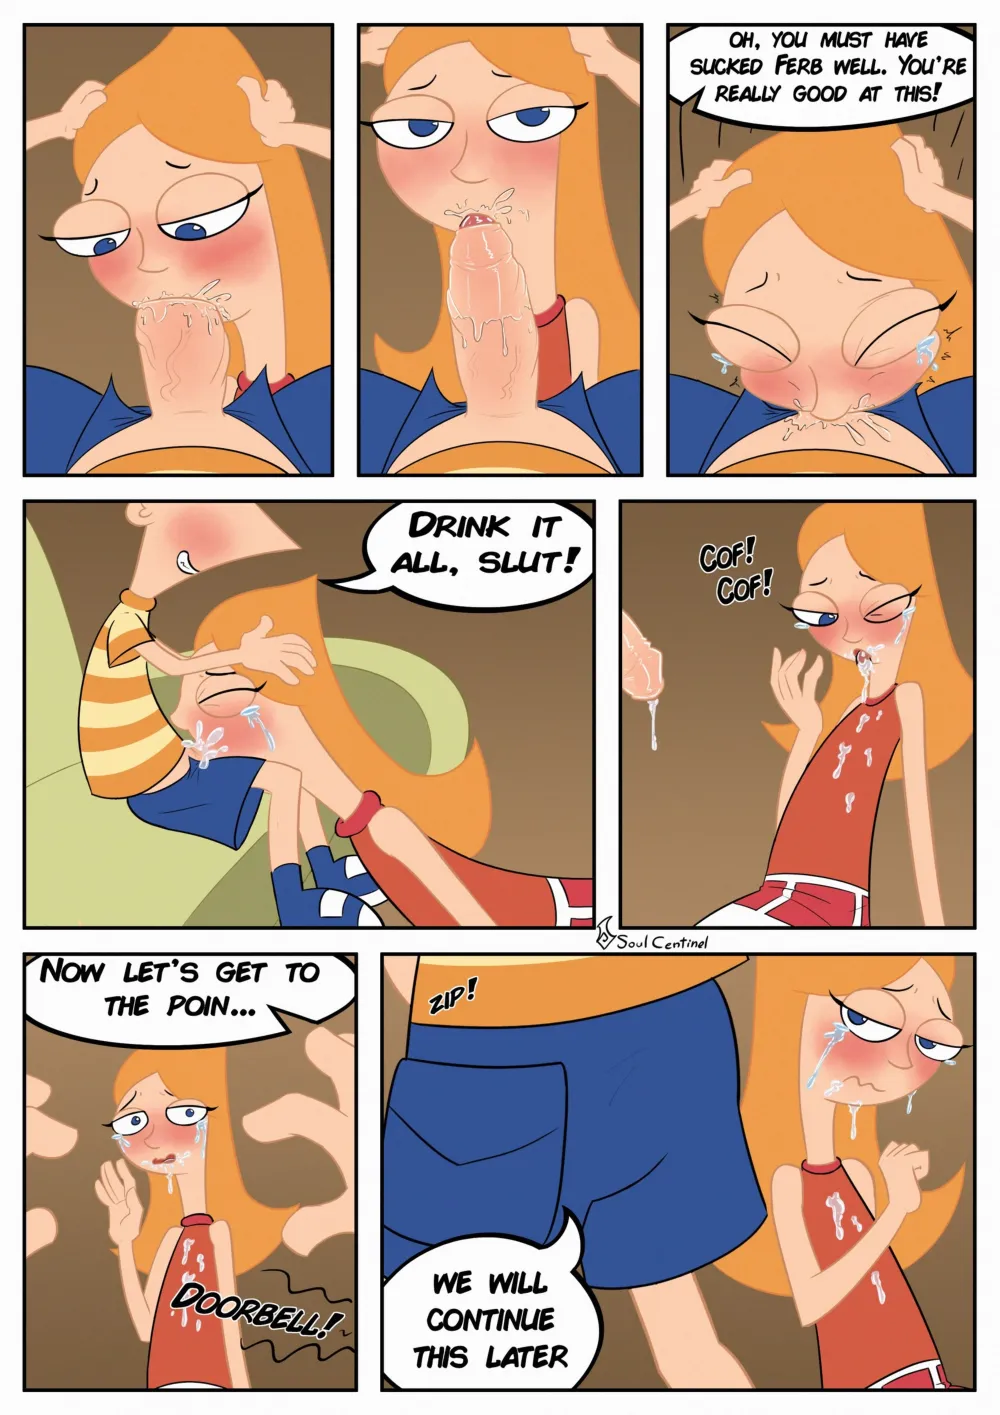 Phineas's Revenge - Page 5